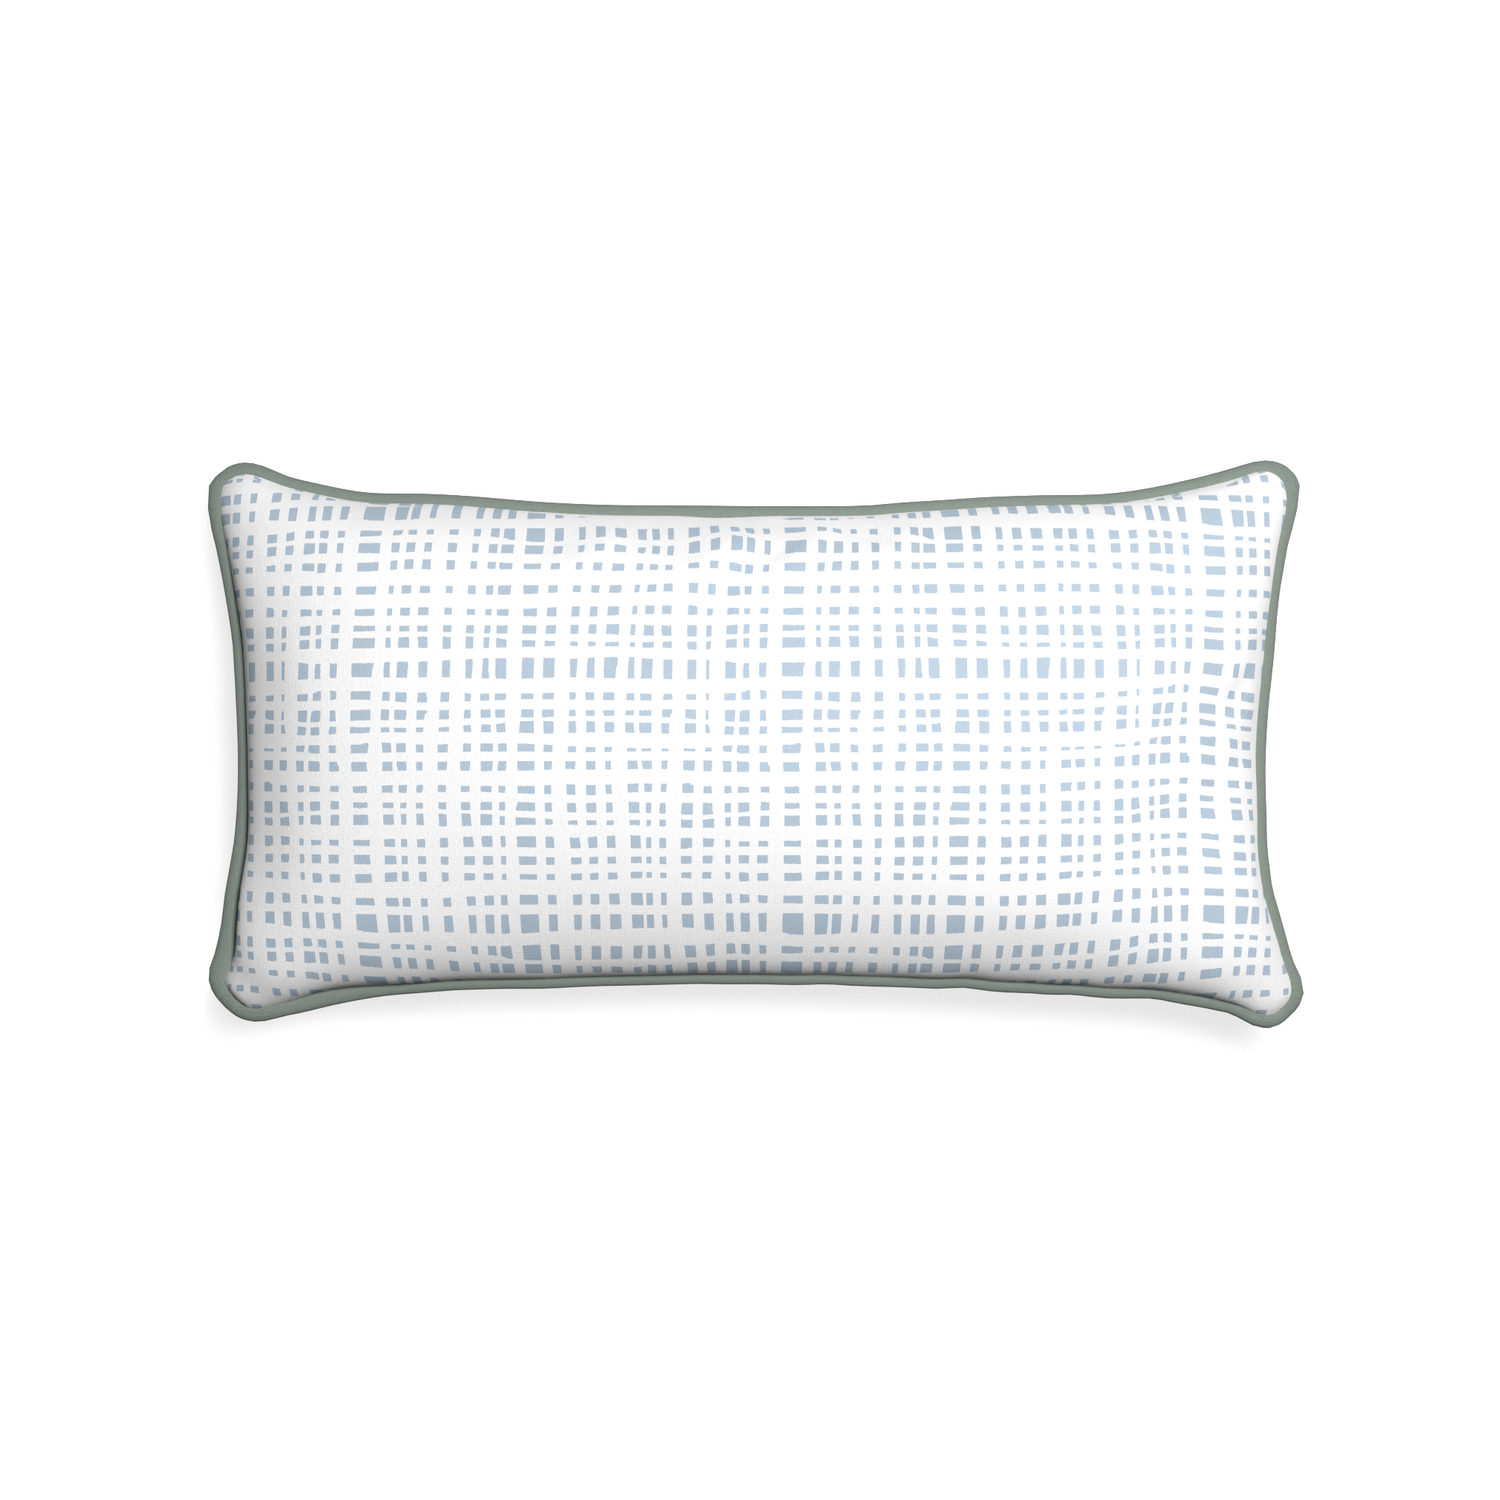 Midi-lumbar ginger custom plaid sky bluepillow with sage piping on white background